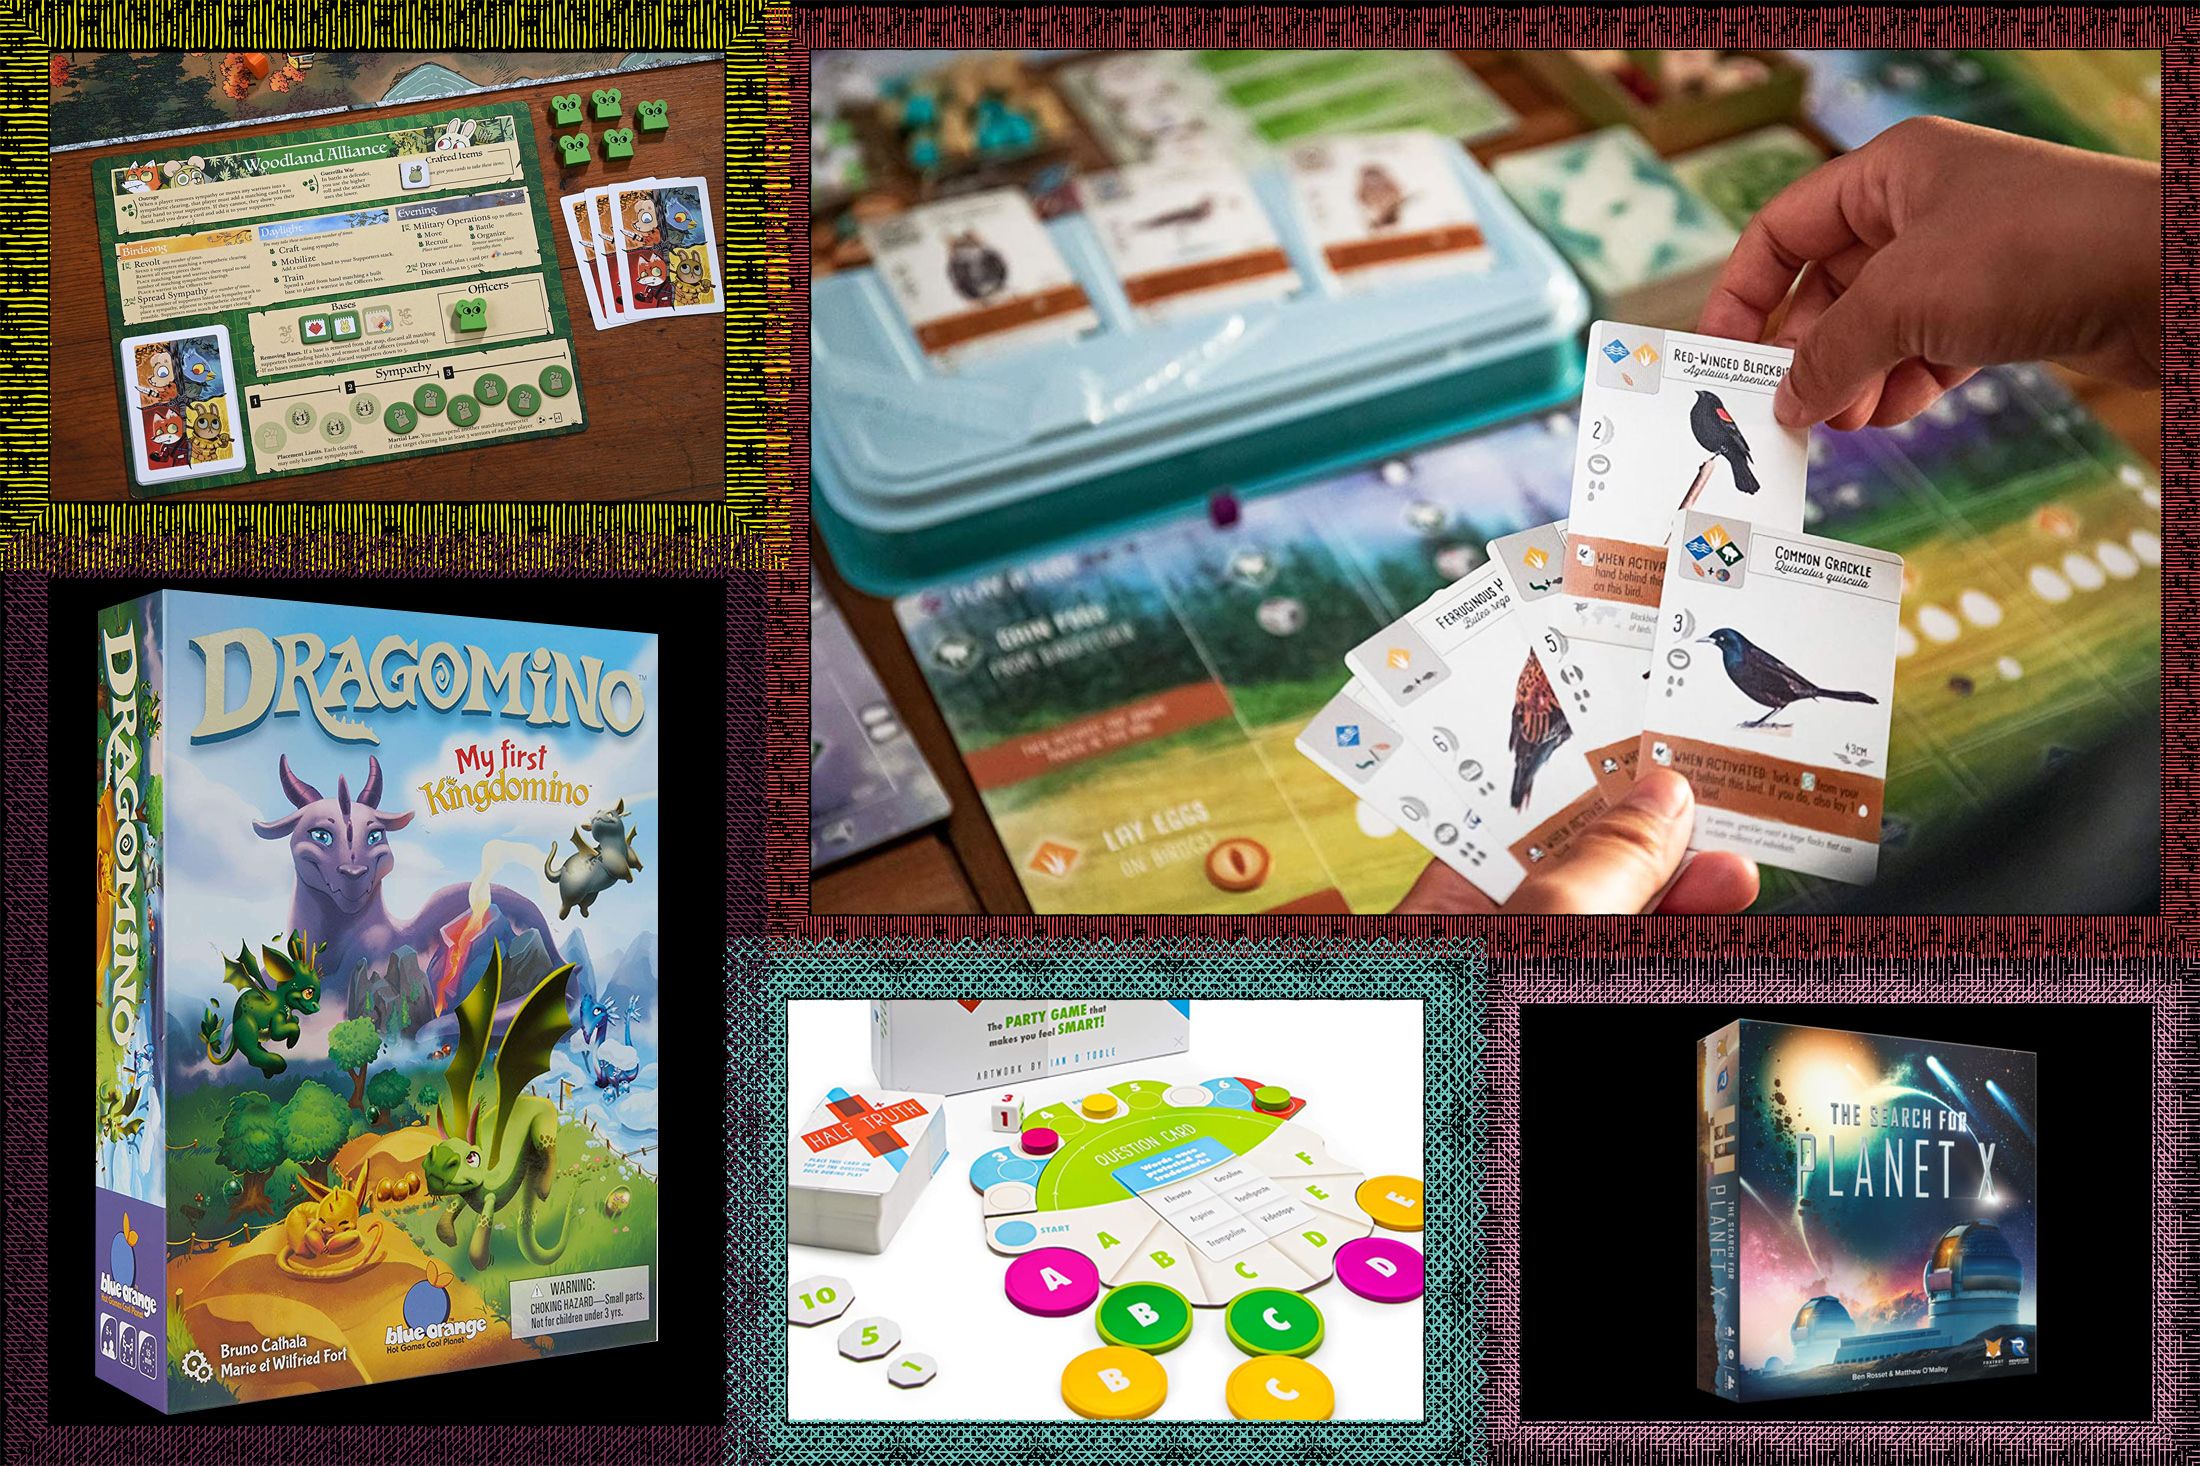 12 Useful Board Game Pieces for Making Your Game - Streamlined Gaming